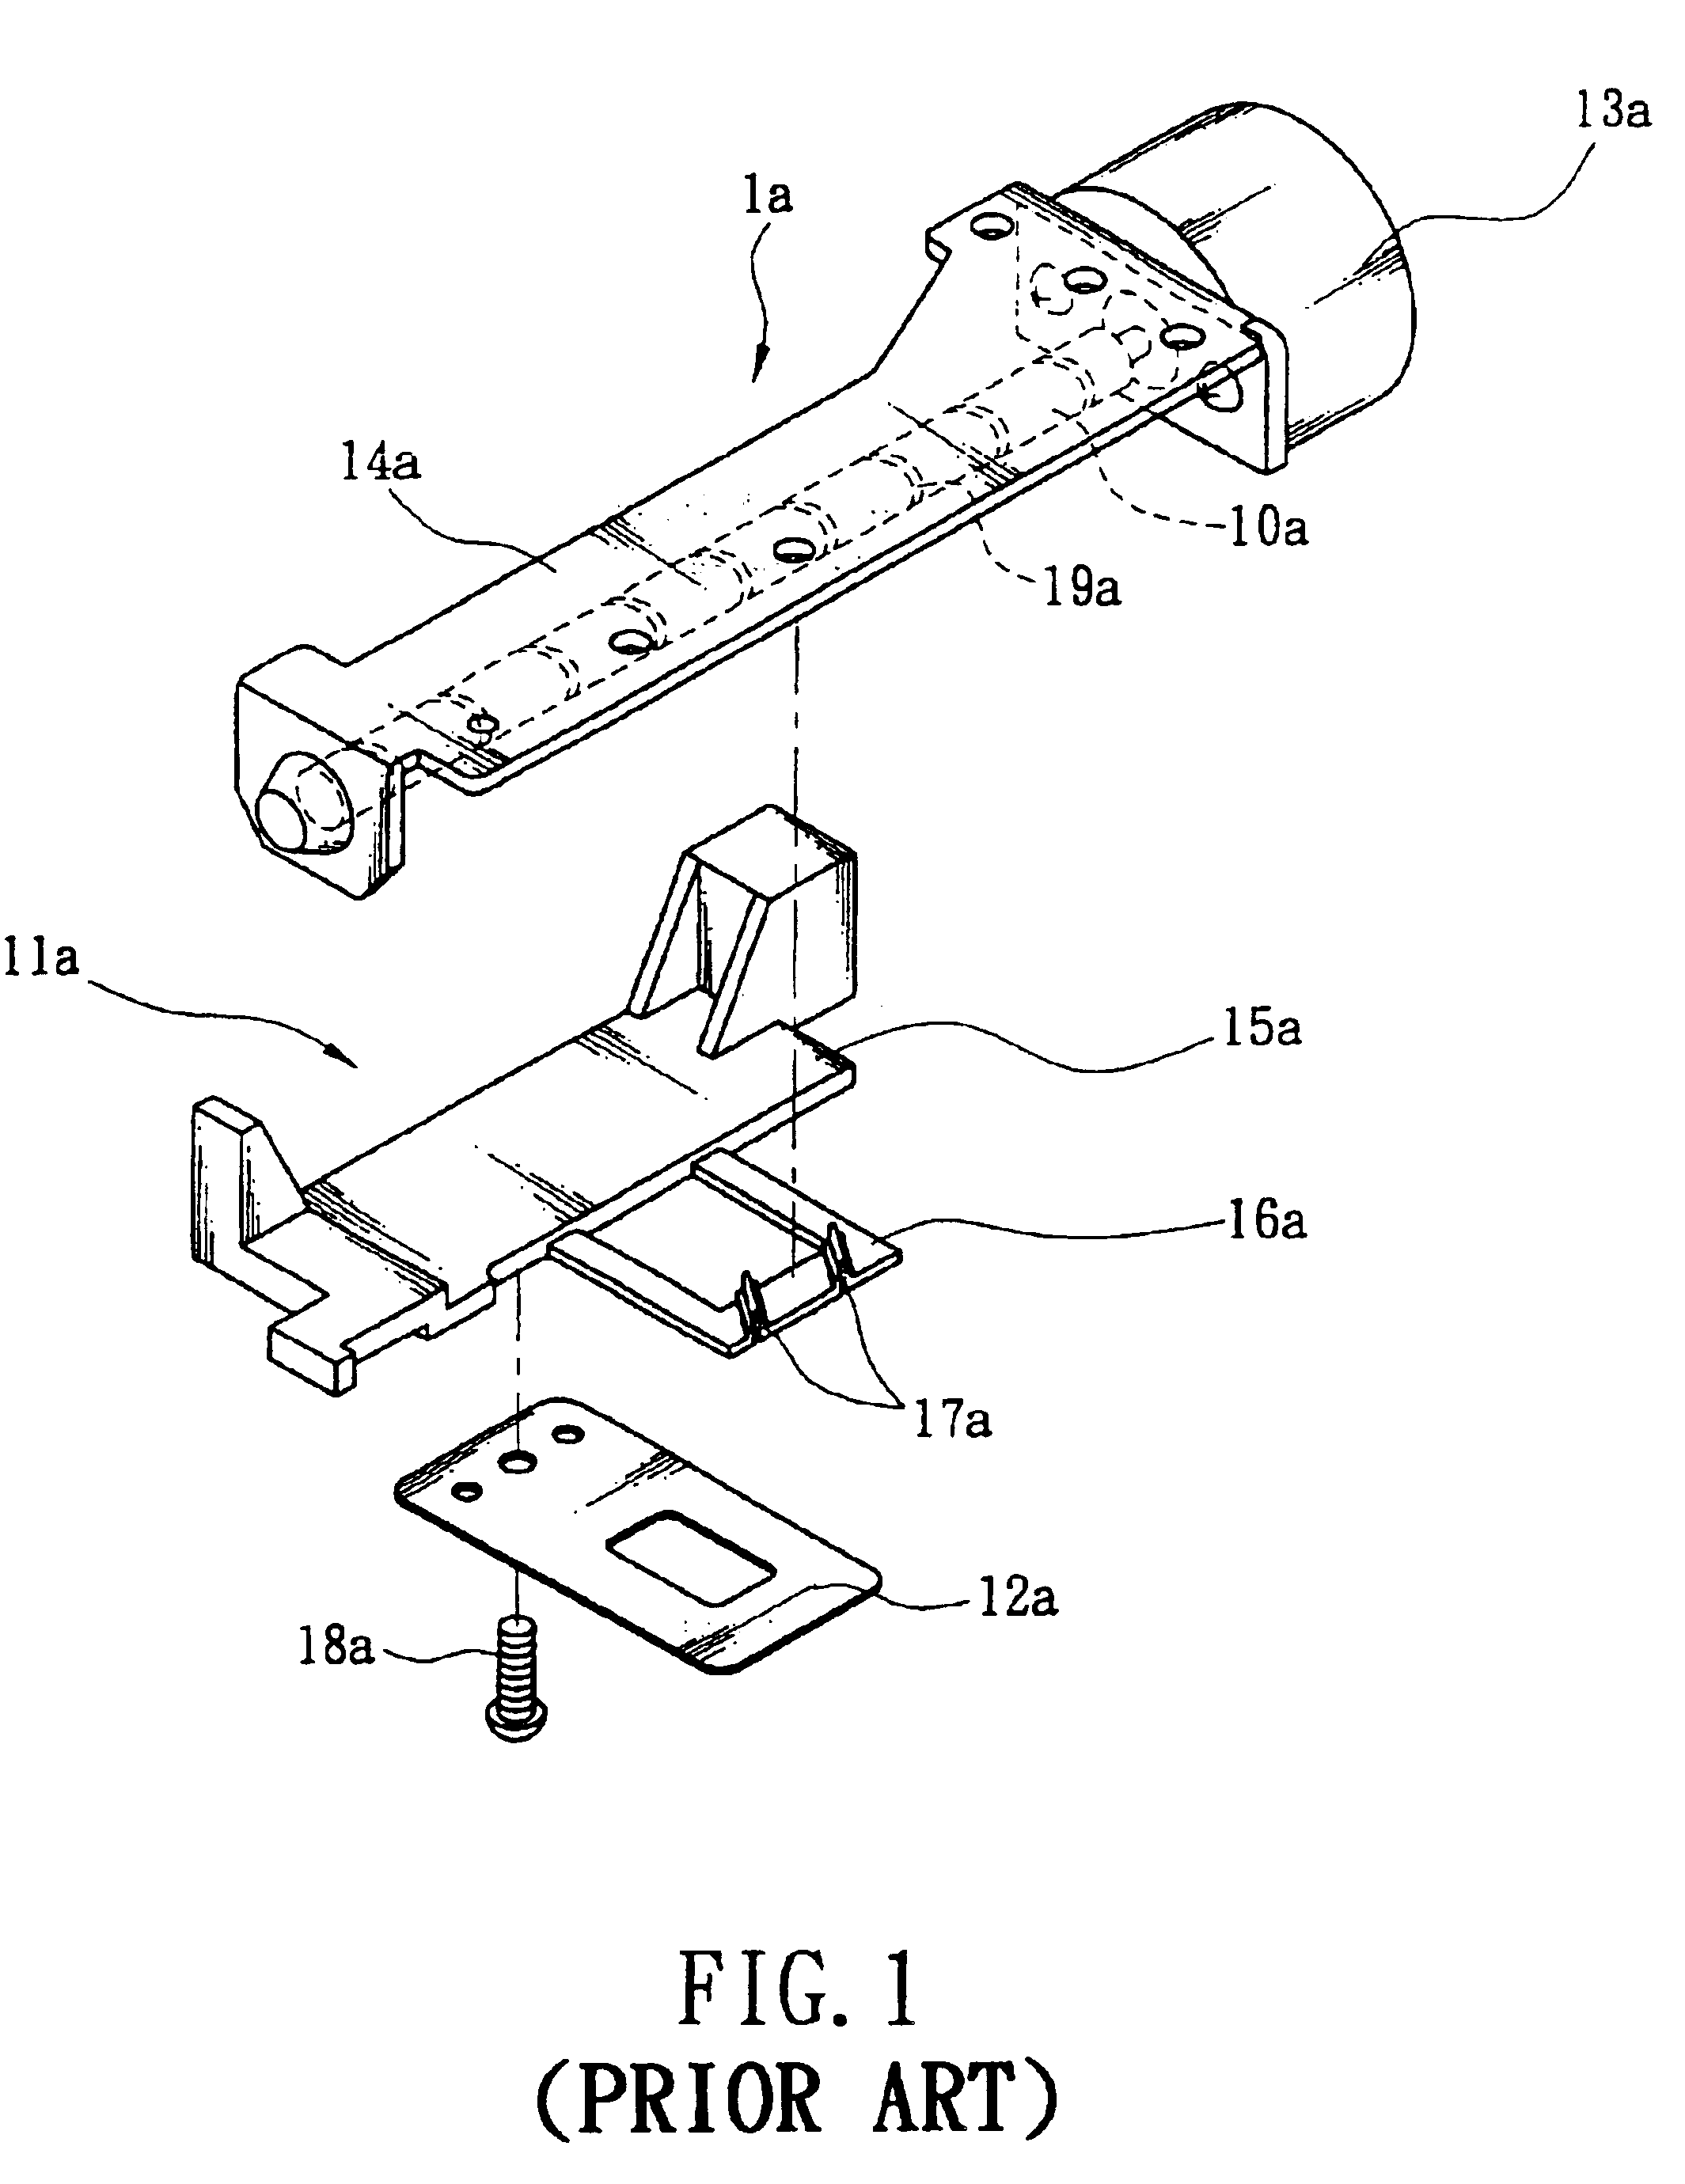 Sled apparatus for optical head frame of optical disk drive